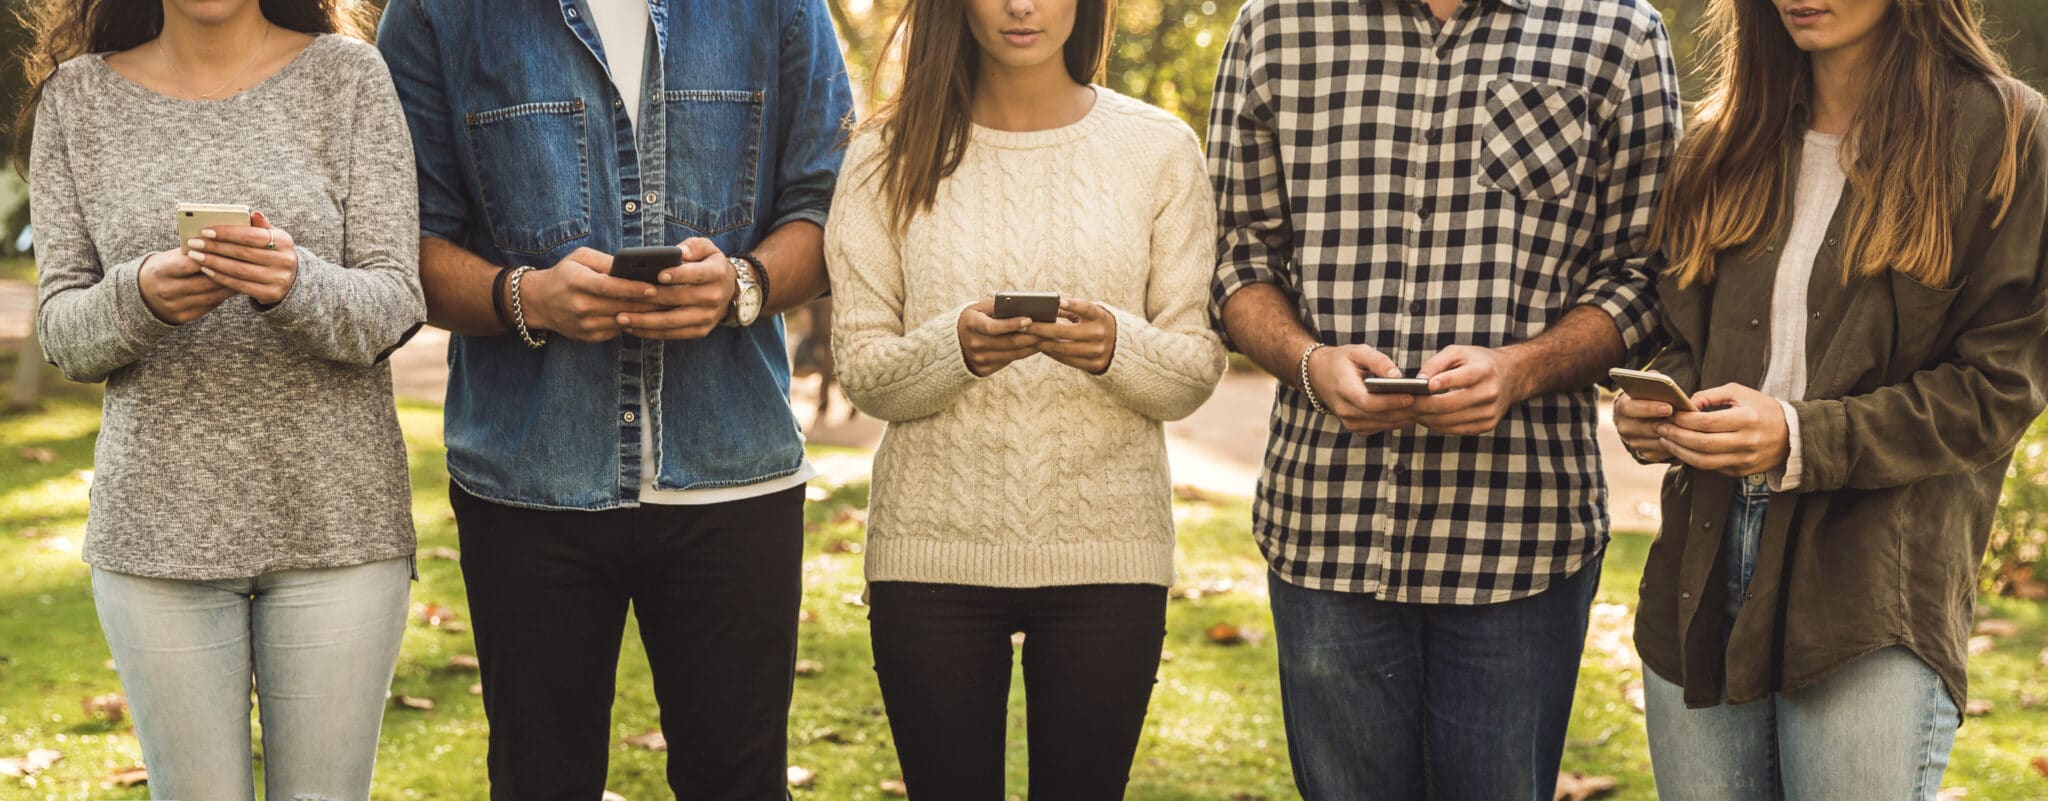 Group of friends distracted with social networks on their phones